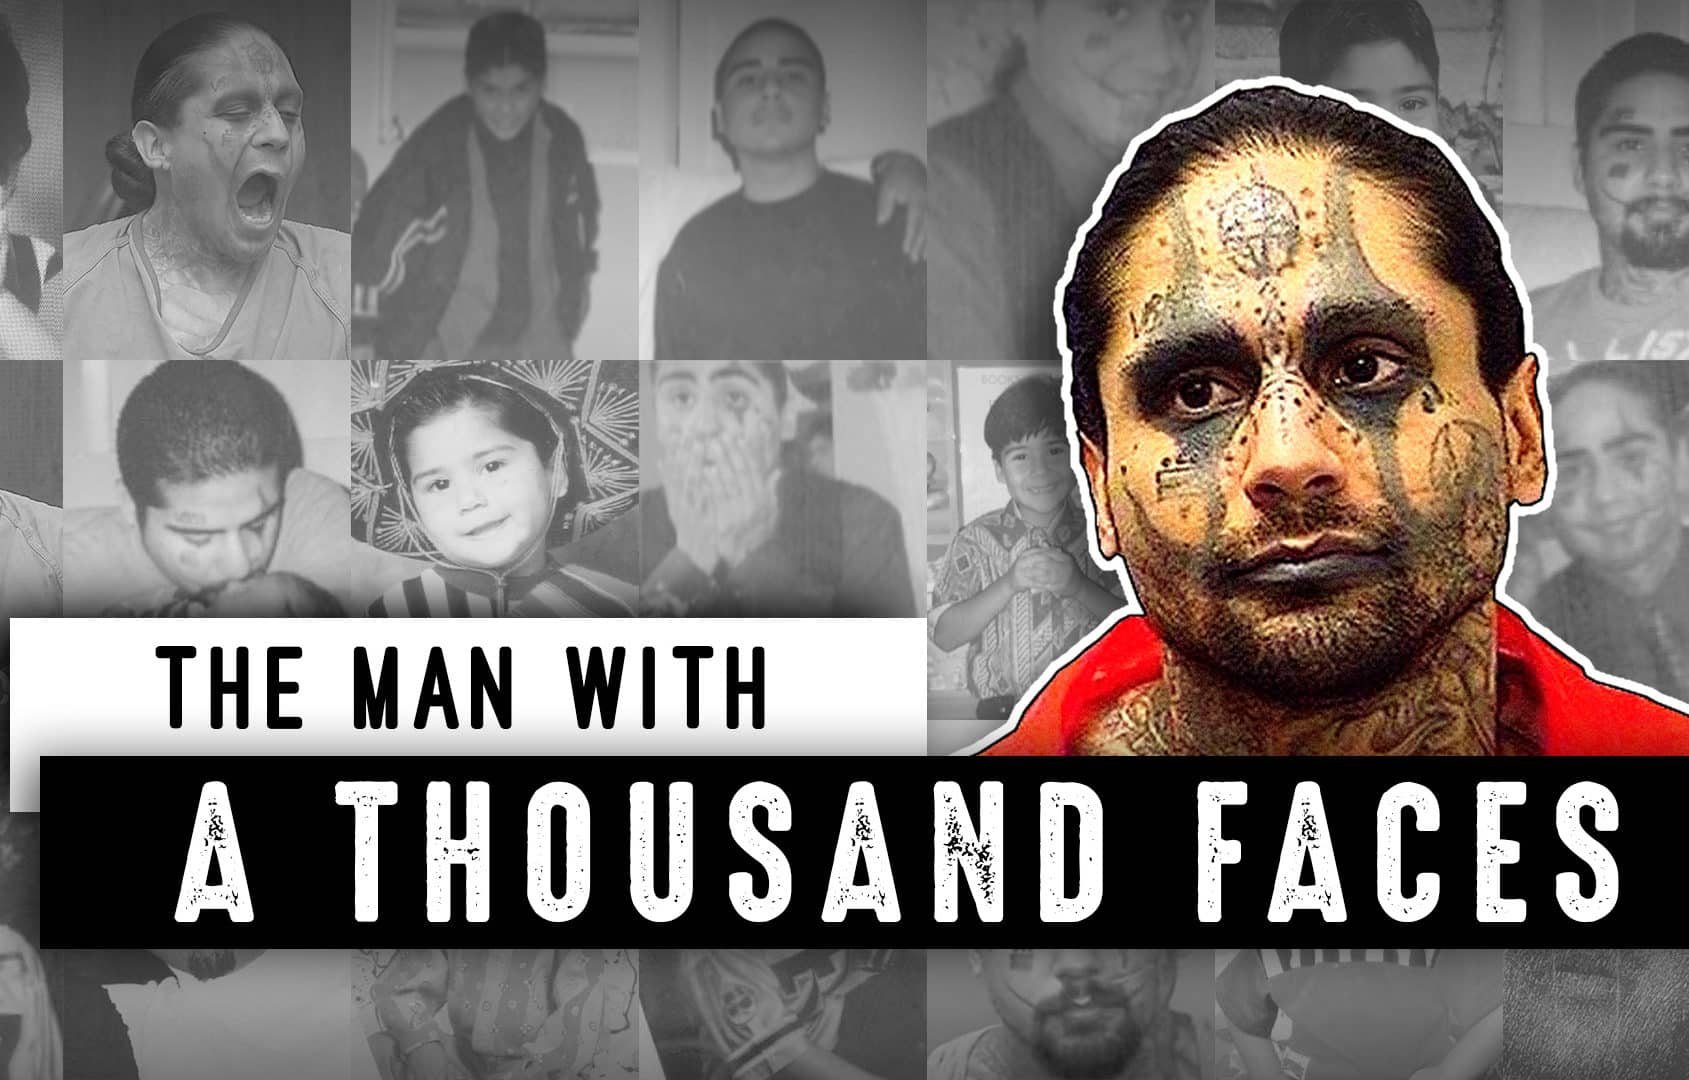 Chain | Cohn | Clark investigator featured in true-crime podcast ‘The Man With a Thousand Faces’